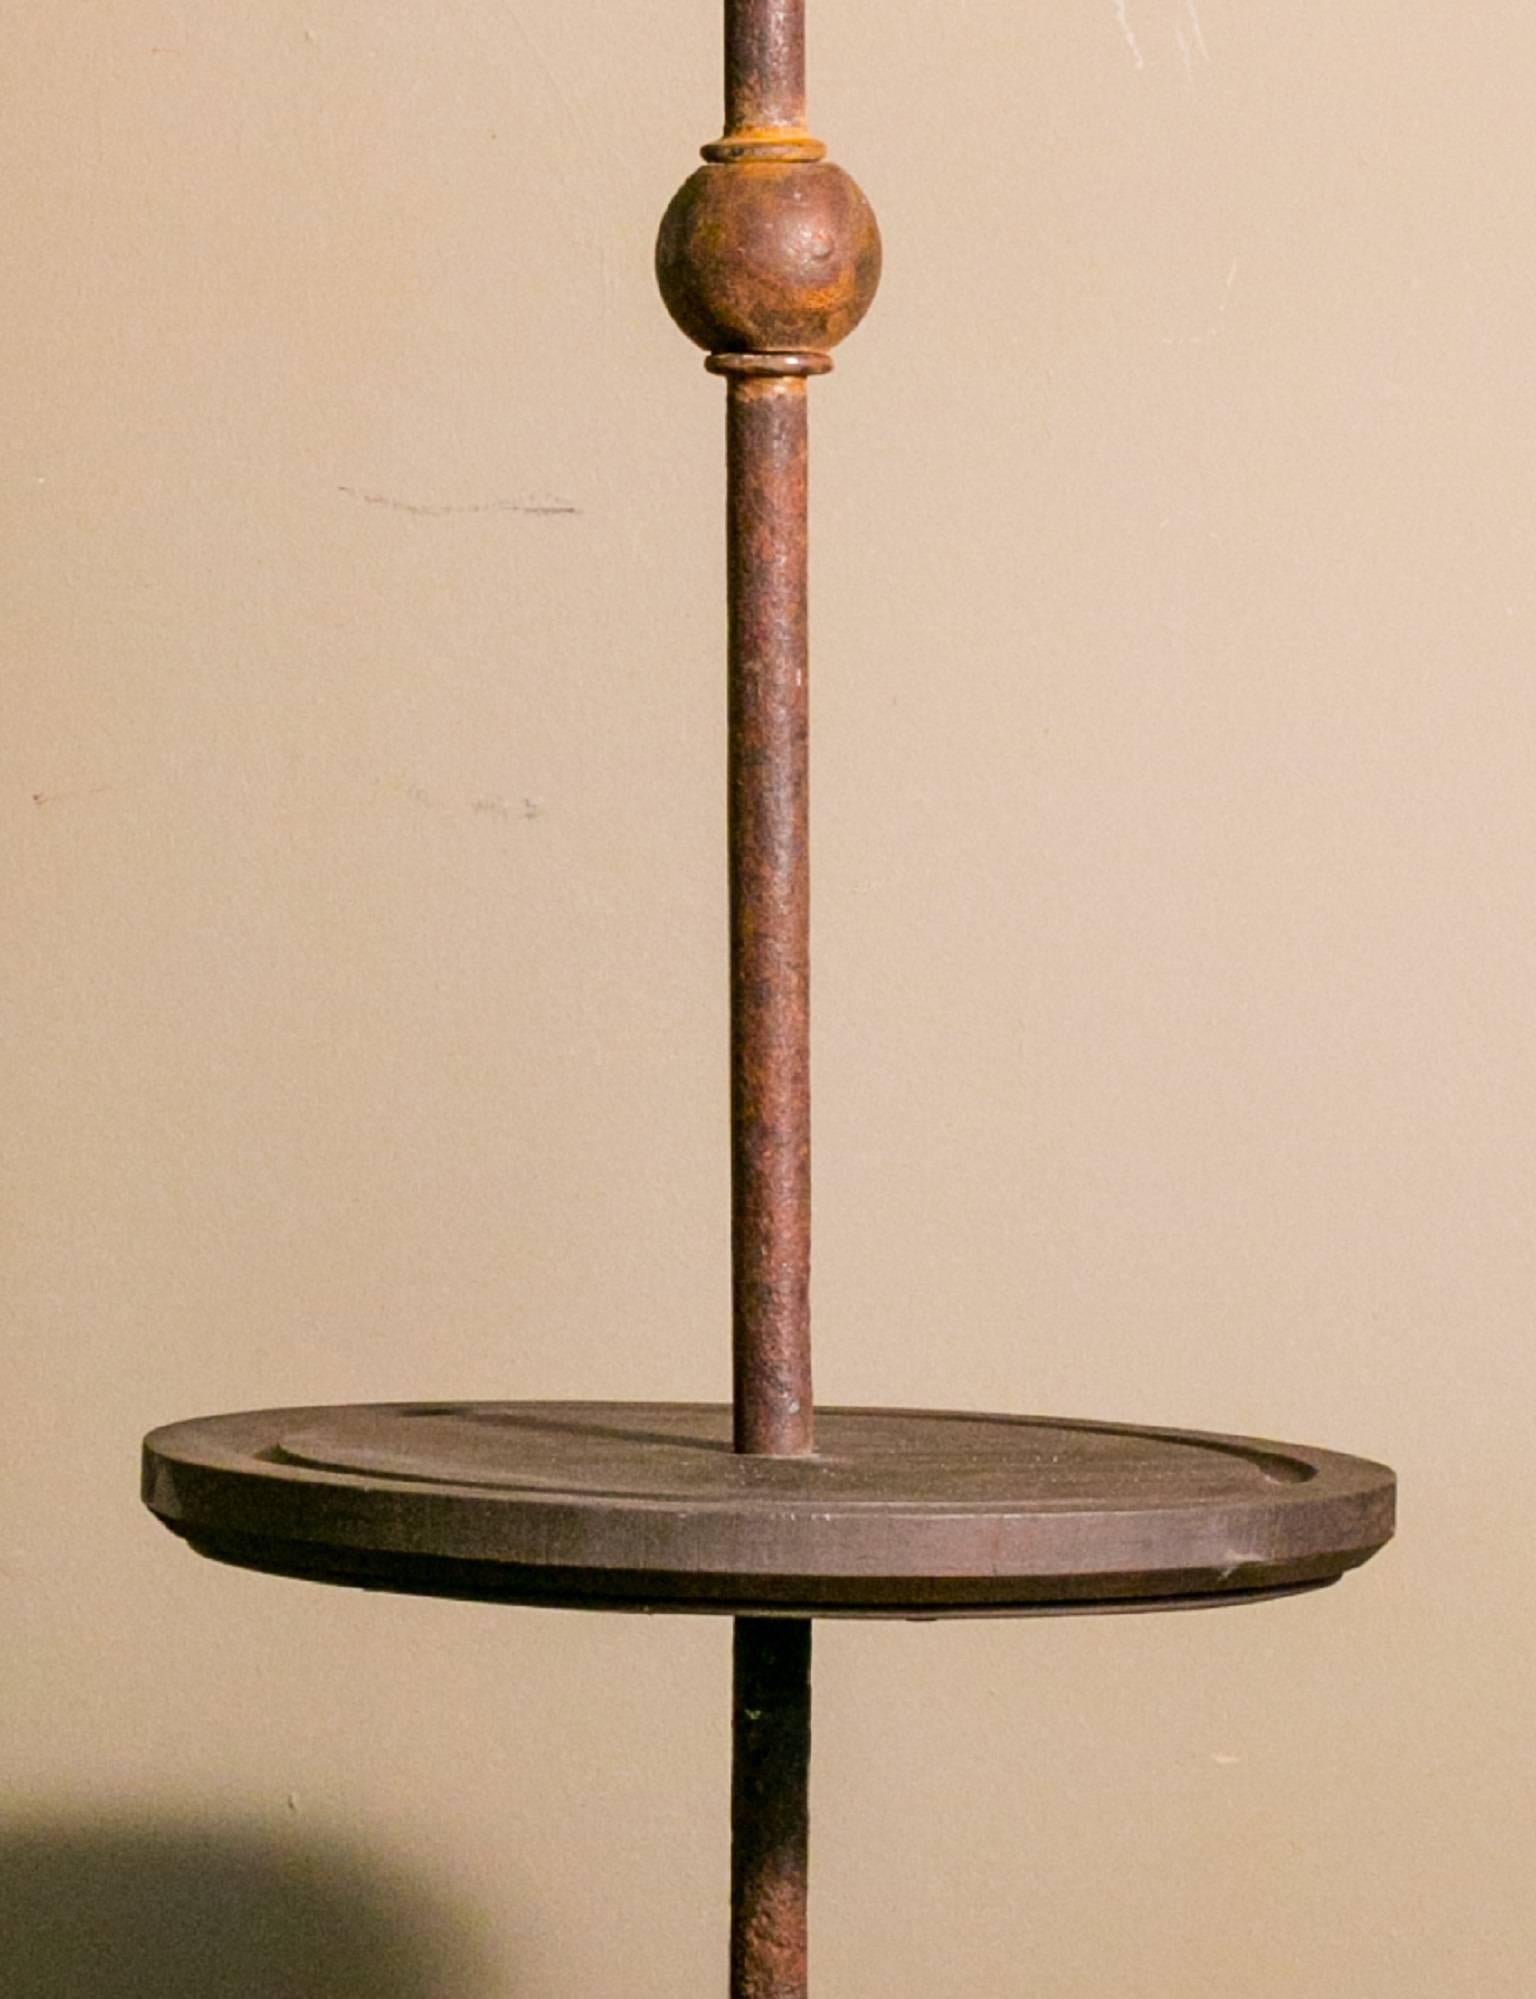 Custom, black-smith made iron floor lamp with grooved, round wooden center, painted to match finish. Newly wired in the USA with all UL listed parts. Sold without bulb and shade. Diameter is of the base, round wooden center diameter is 13 inches.